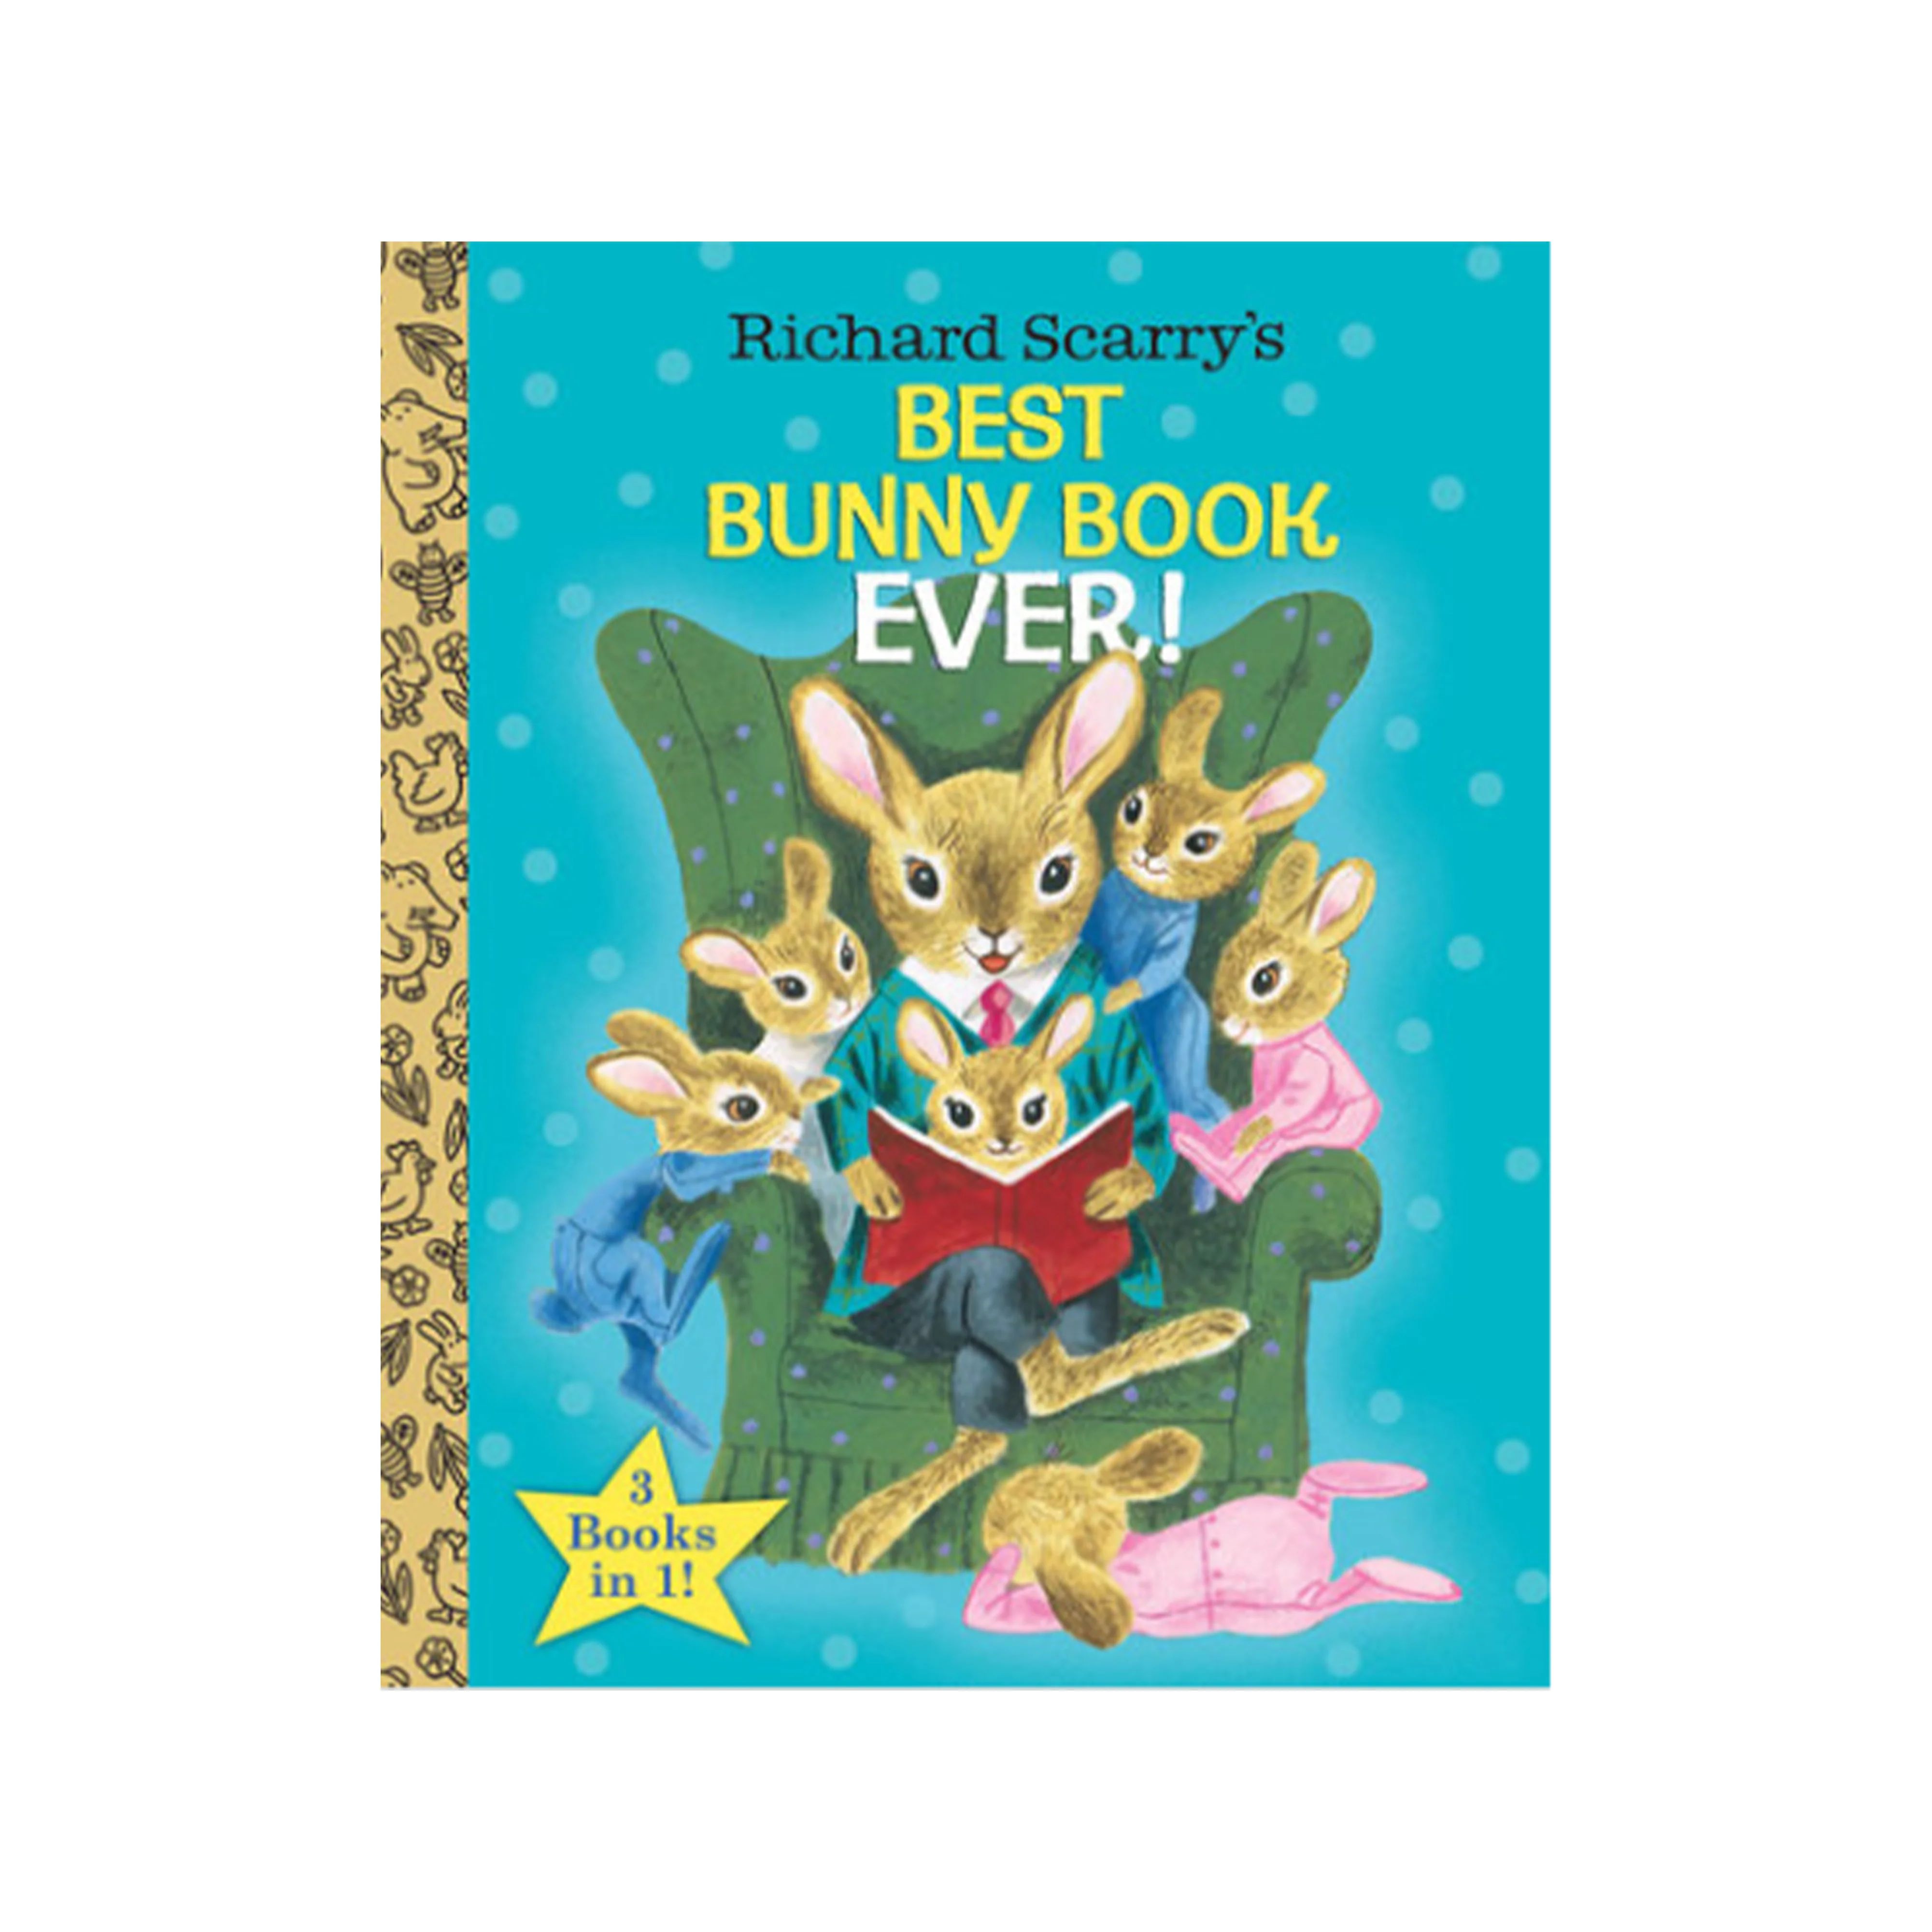 The Best Bunny Book Ever (Little Golden Book) - R. Scarry | The Beaufort Bonnet Company